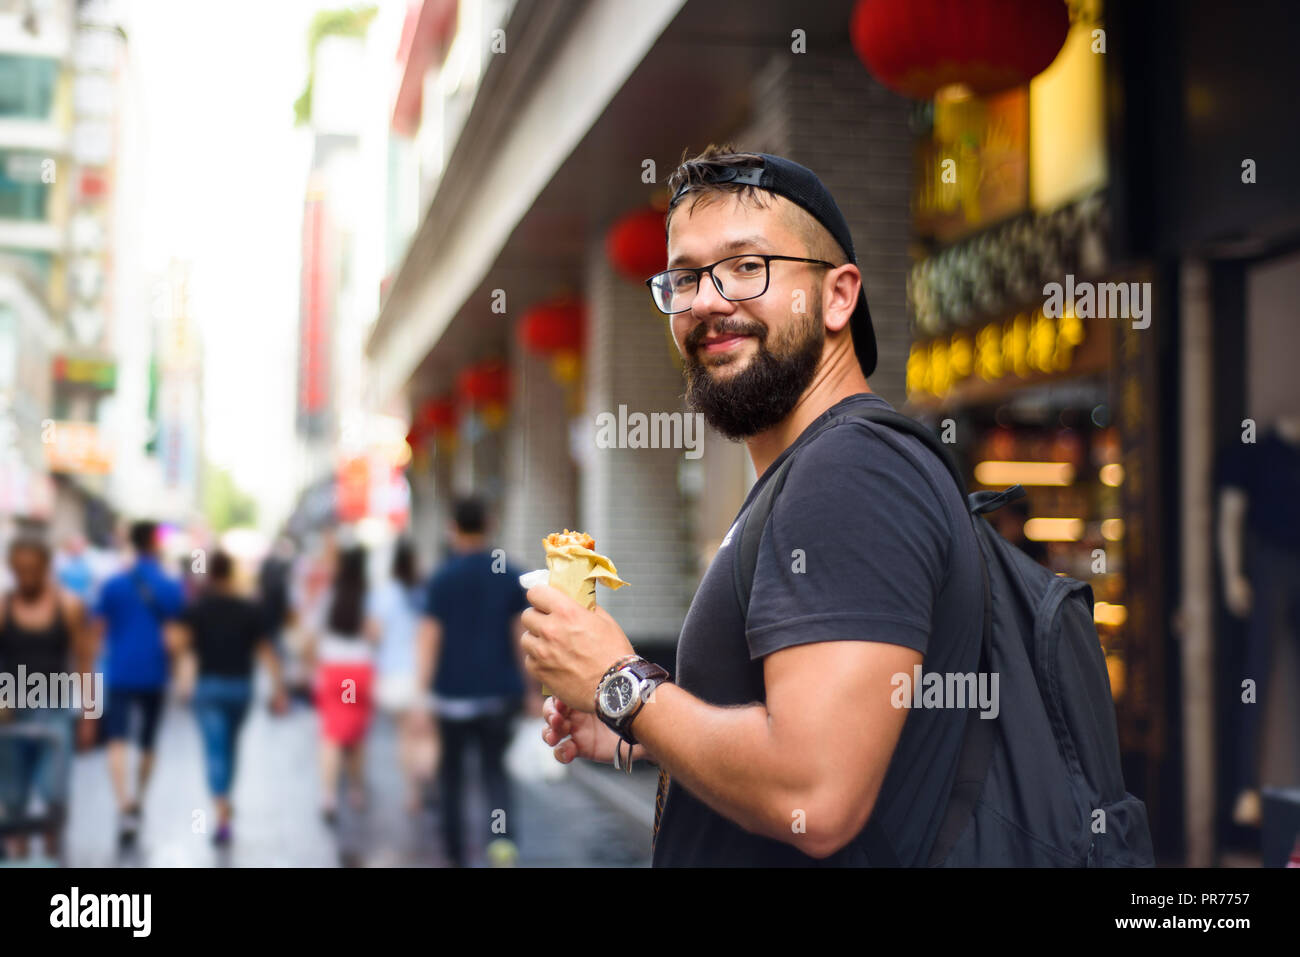 Foreigner eating Chinese street food on the street Stock Photo